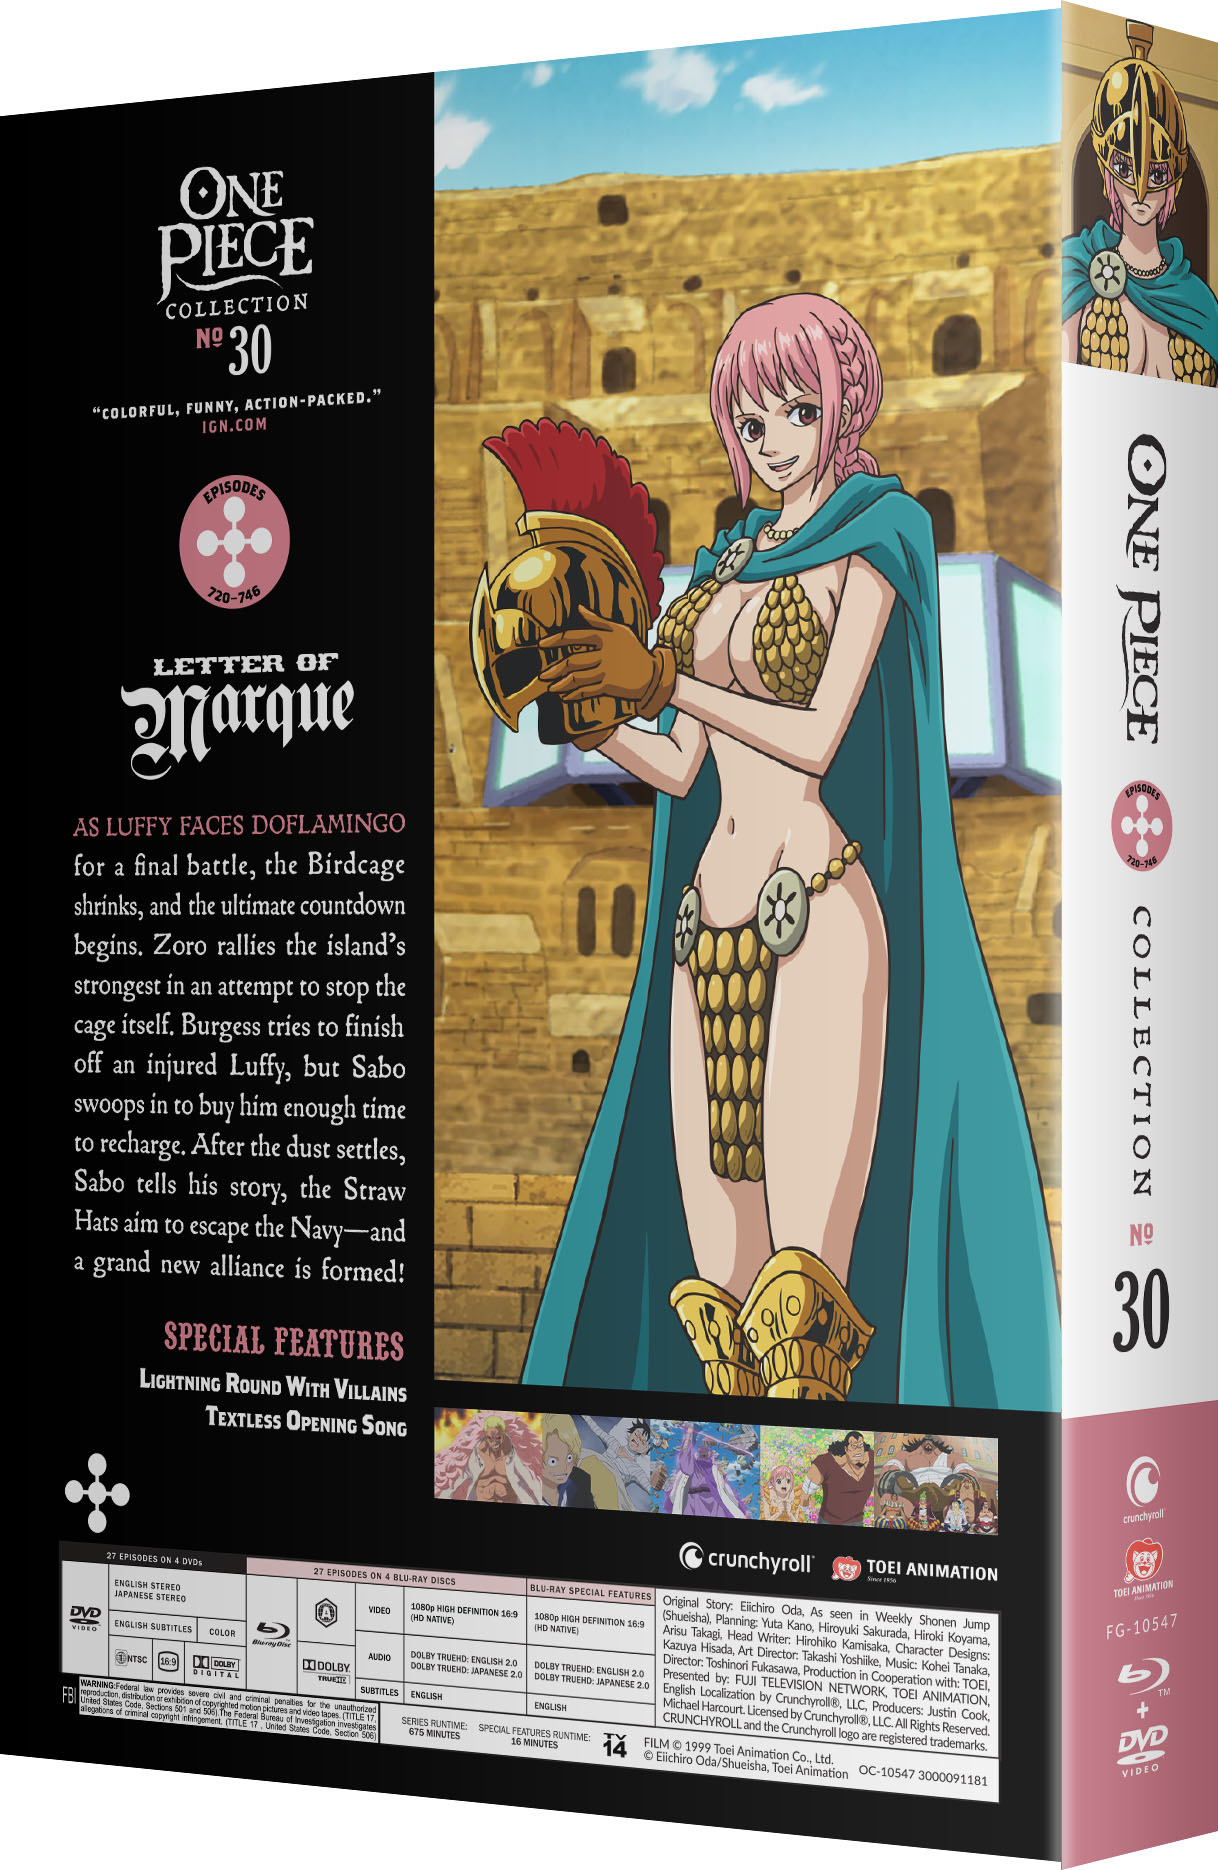 one-piece-collection-30-blu-raydvd image count 1